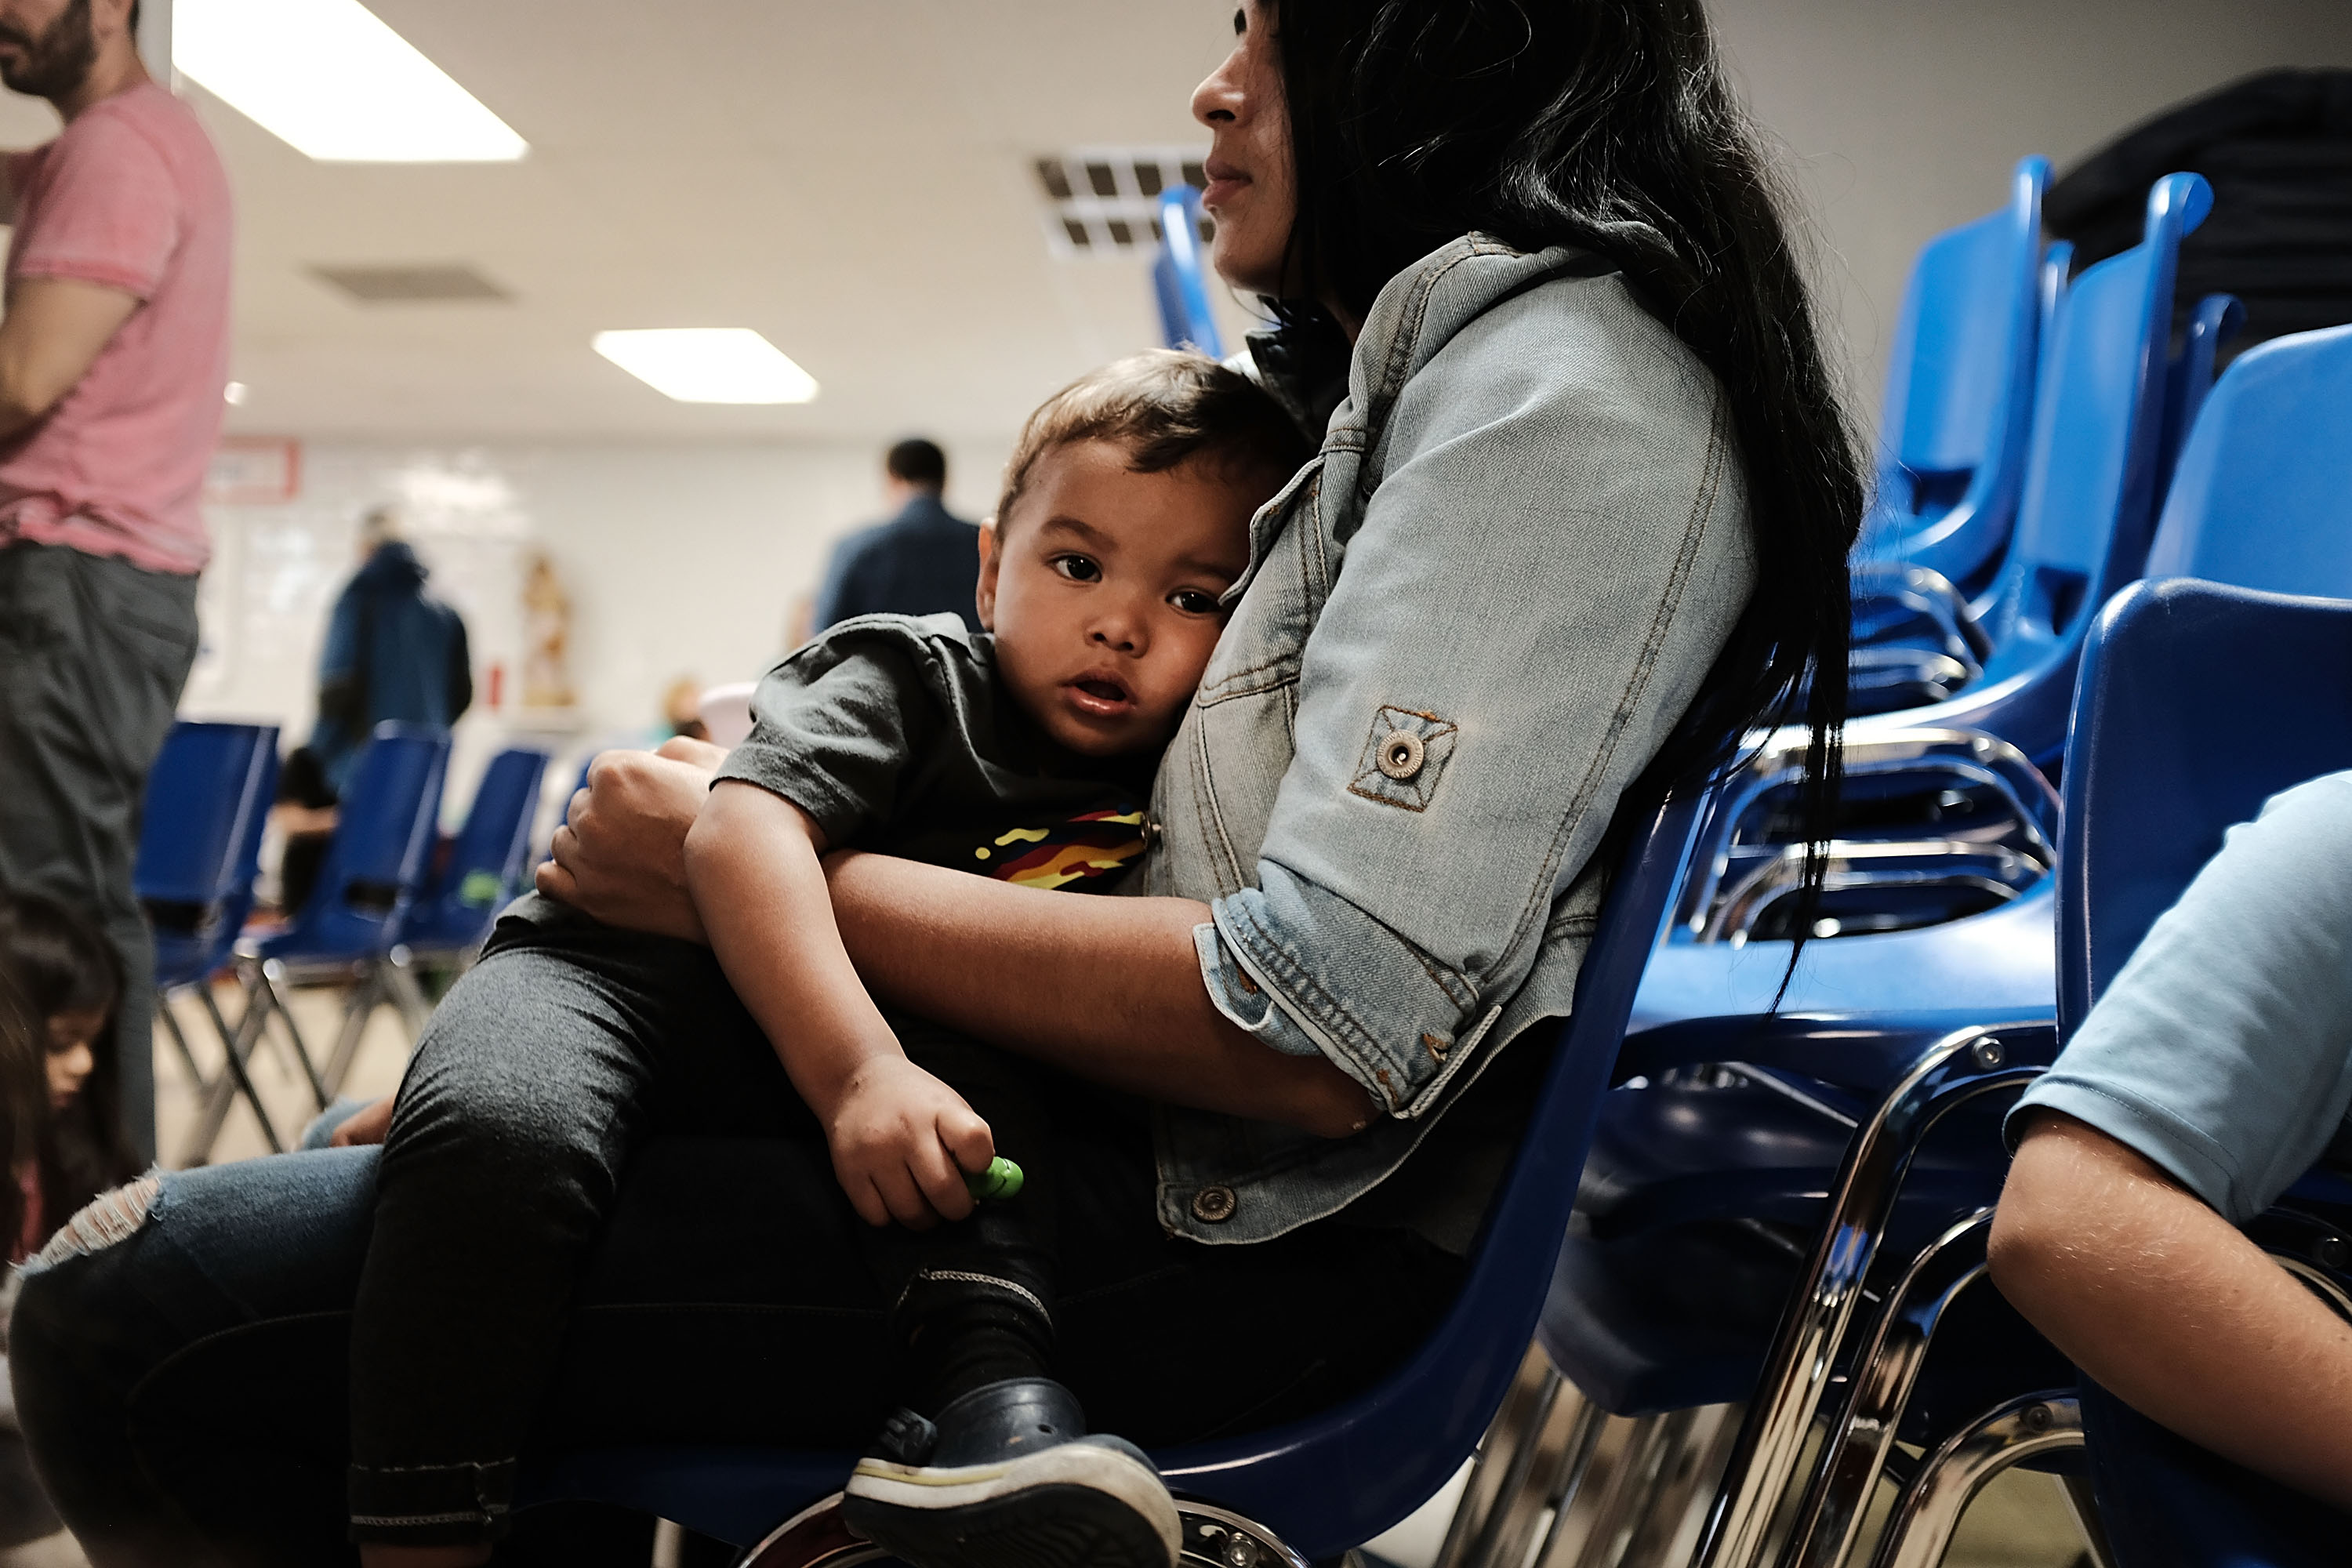 A woman who idendtified herself as Jennifer sits with her son Jaydan at the Catholic Charities Humanitarian Respite Center after recently crossing the U.S., Mexico border on June 21, 2018 in 